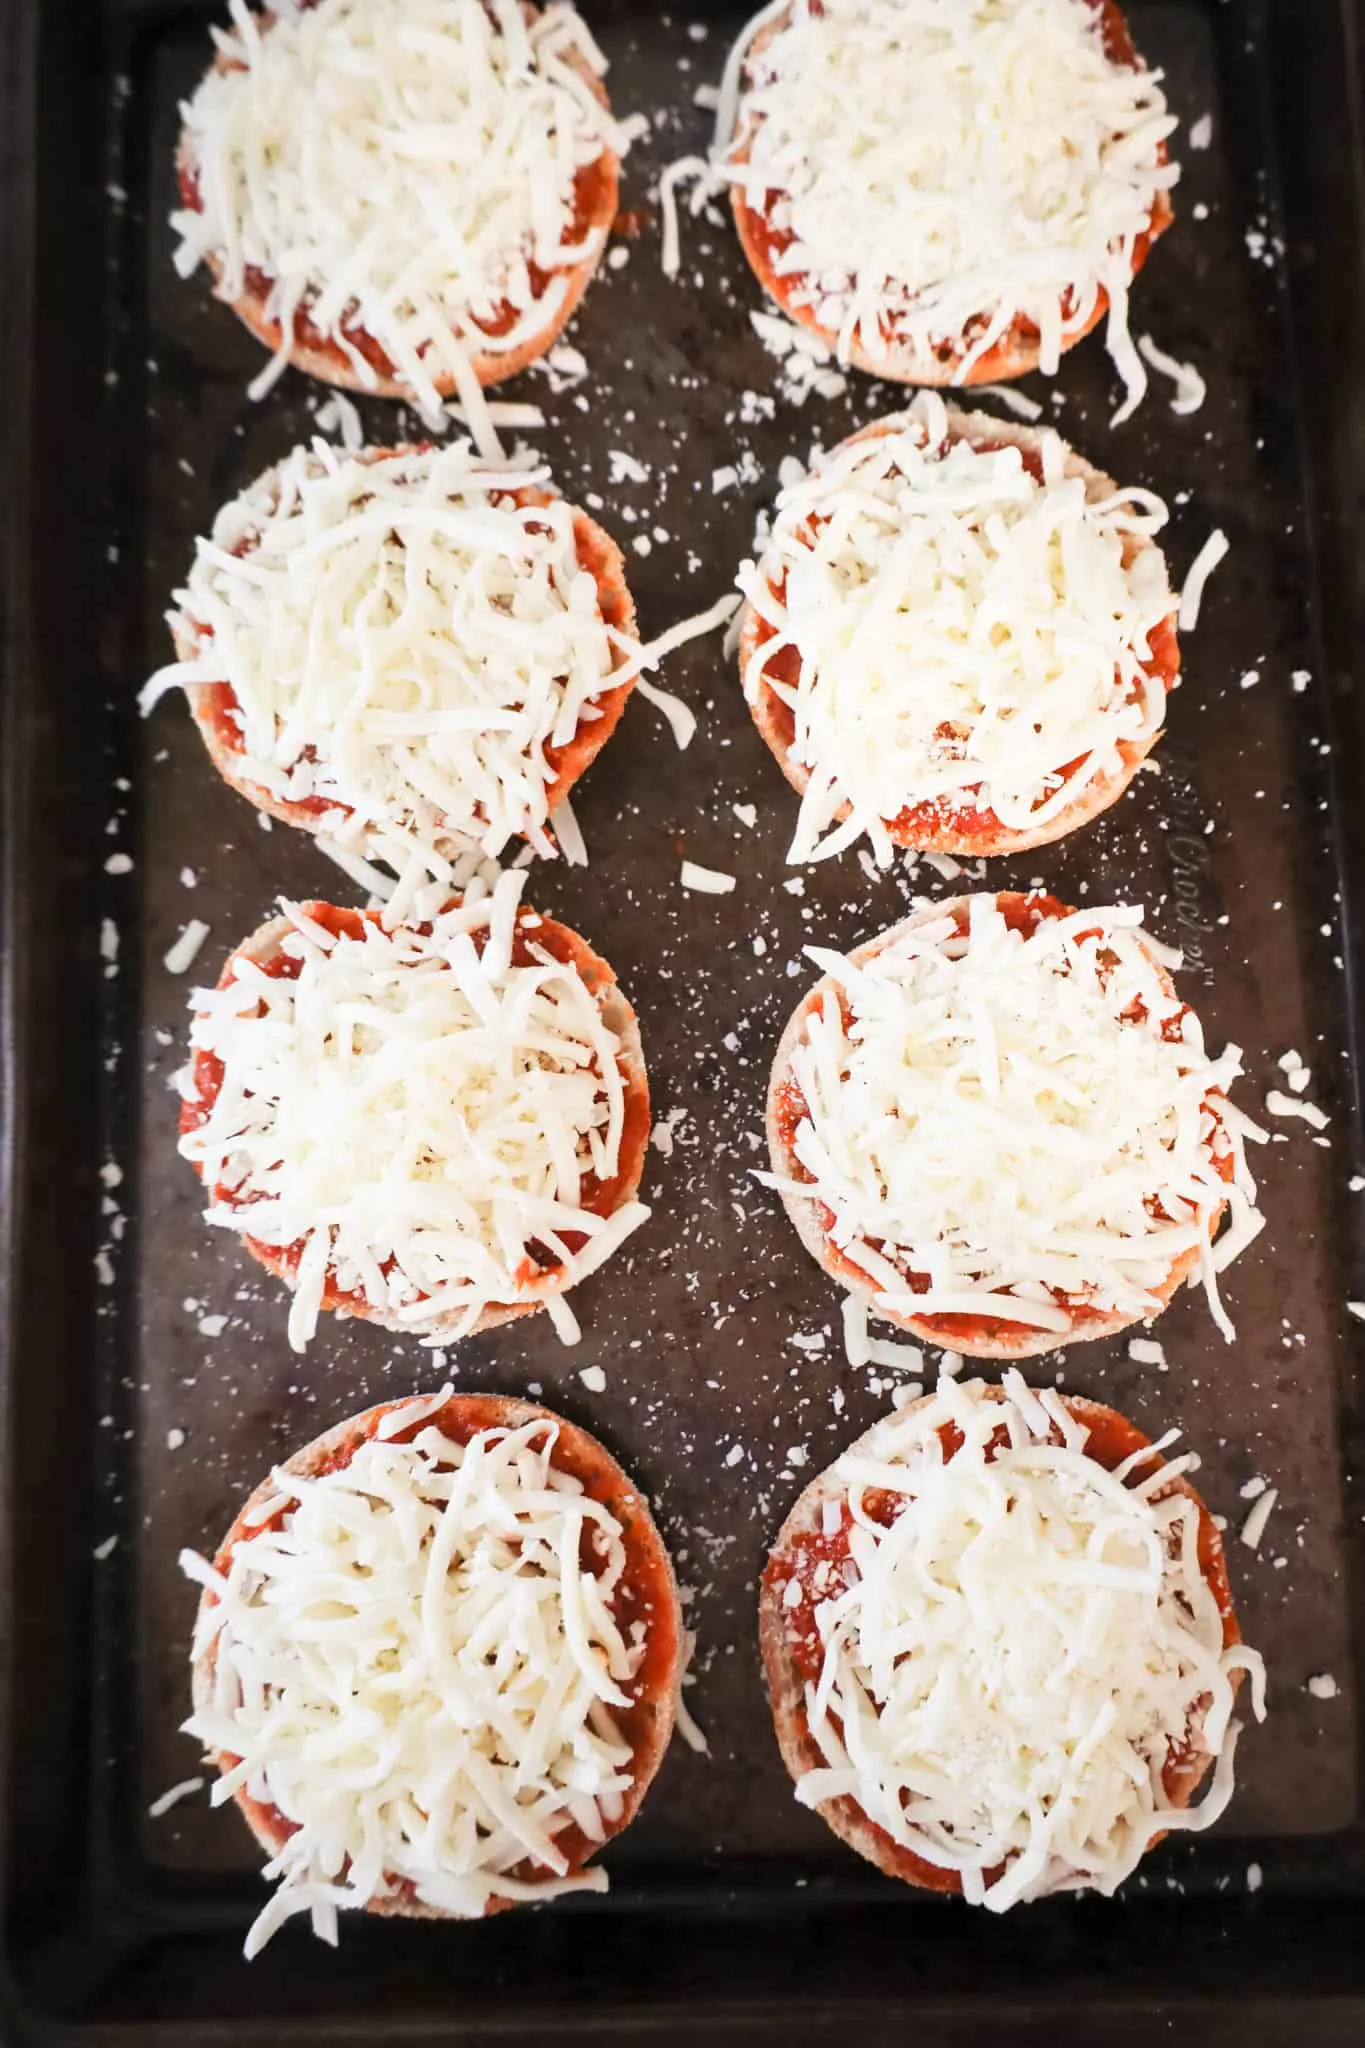 shredded mozzarella cheese on top of pizza sauce on English muffins